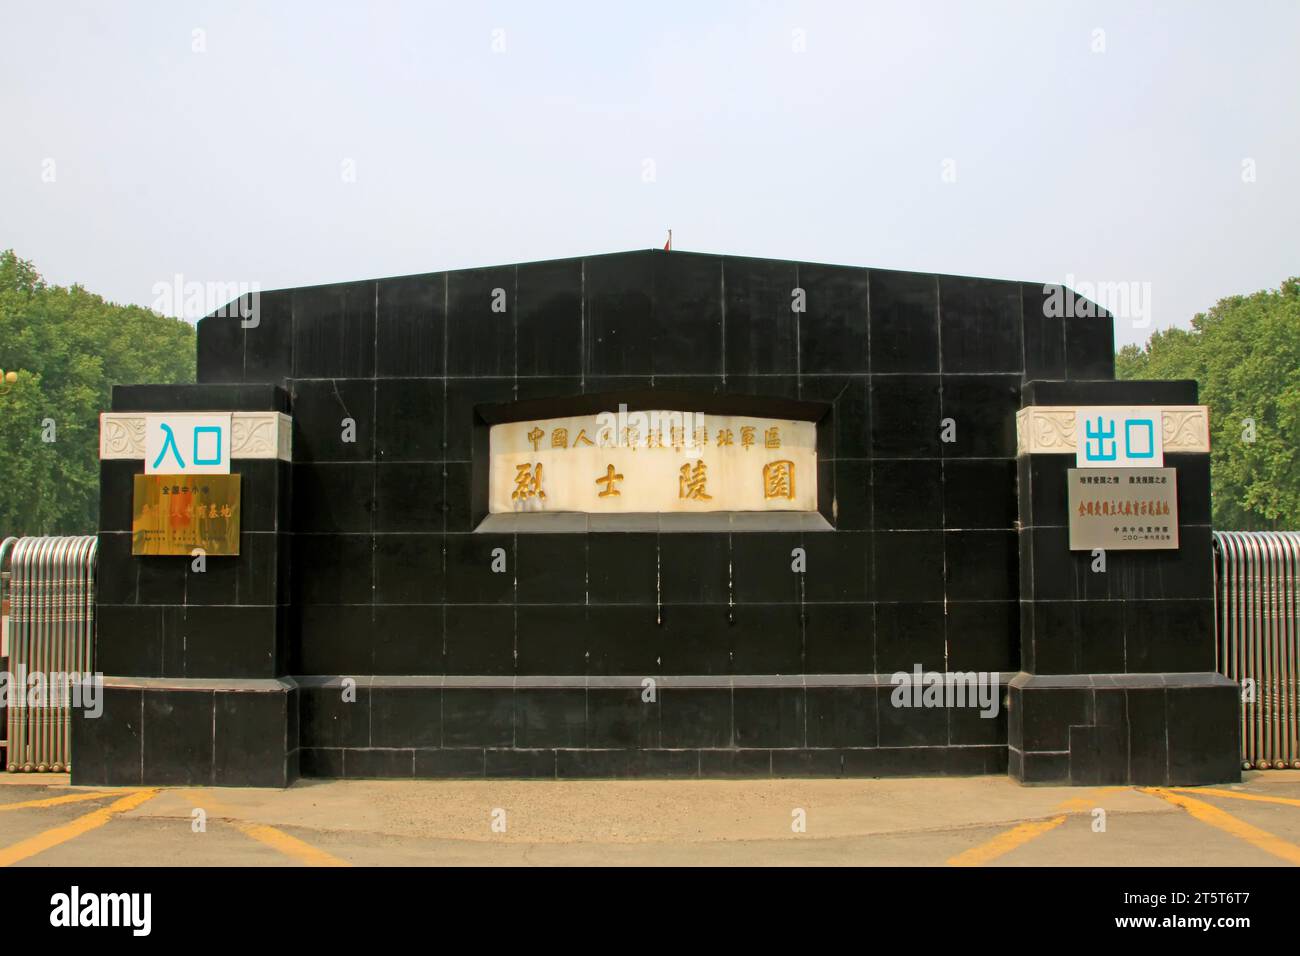 Shijiazhuang - April 28: north China military martyrs cemetery gate sign, on April 28, 2015, shijiazhuang city, hebei province, China Stock Photo